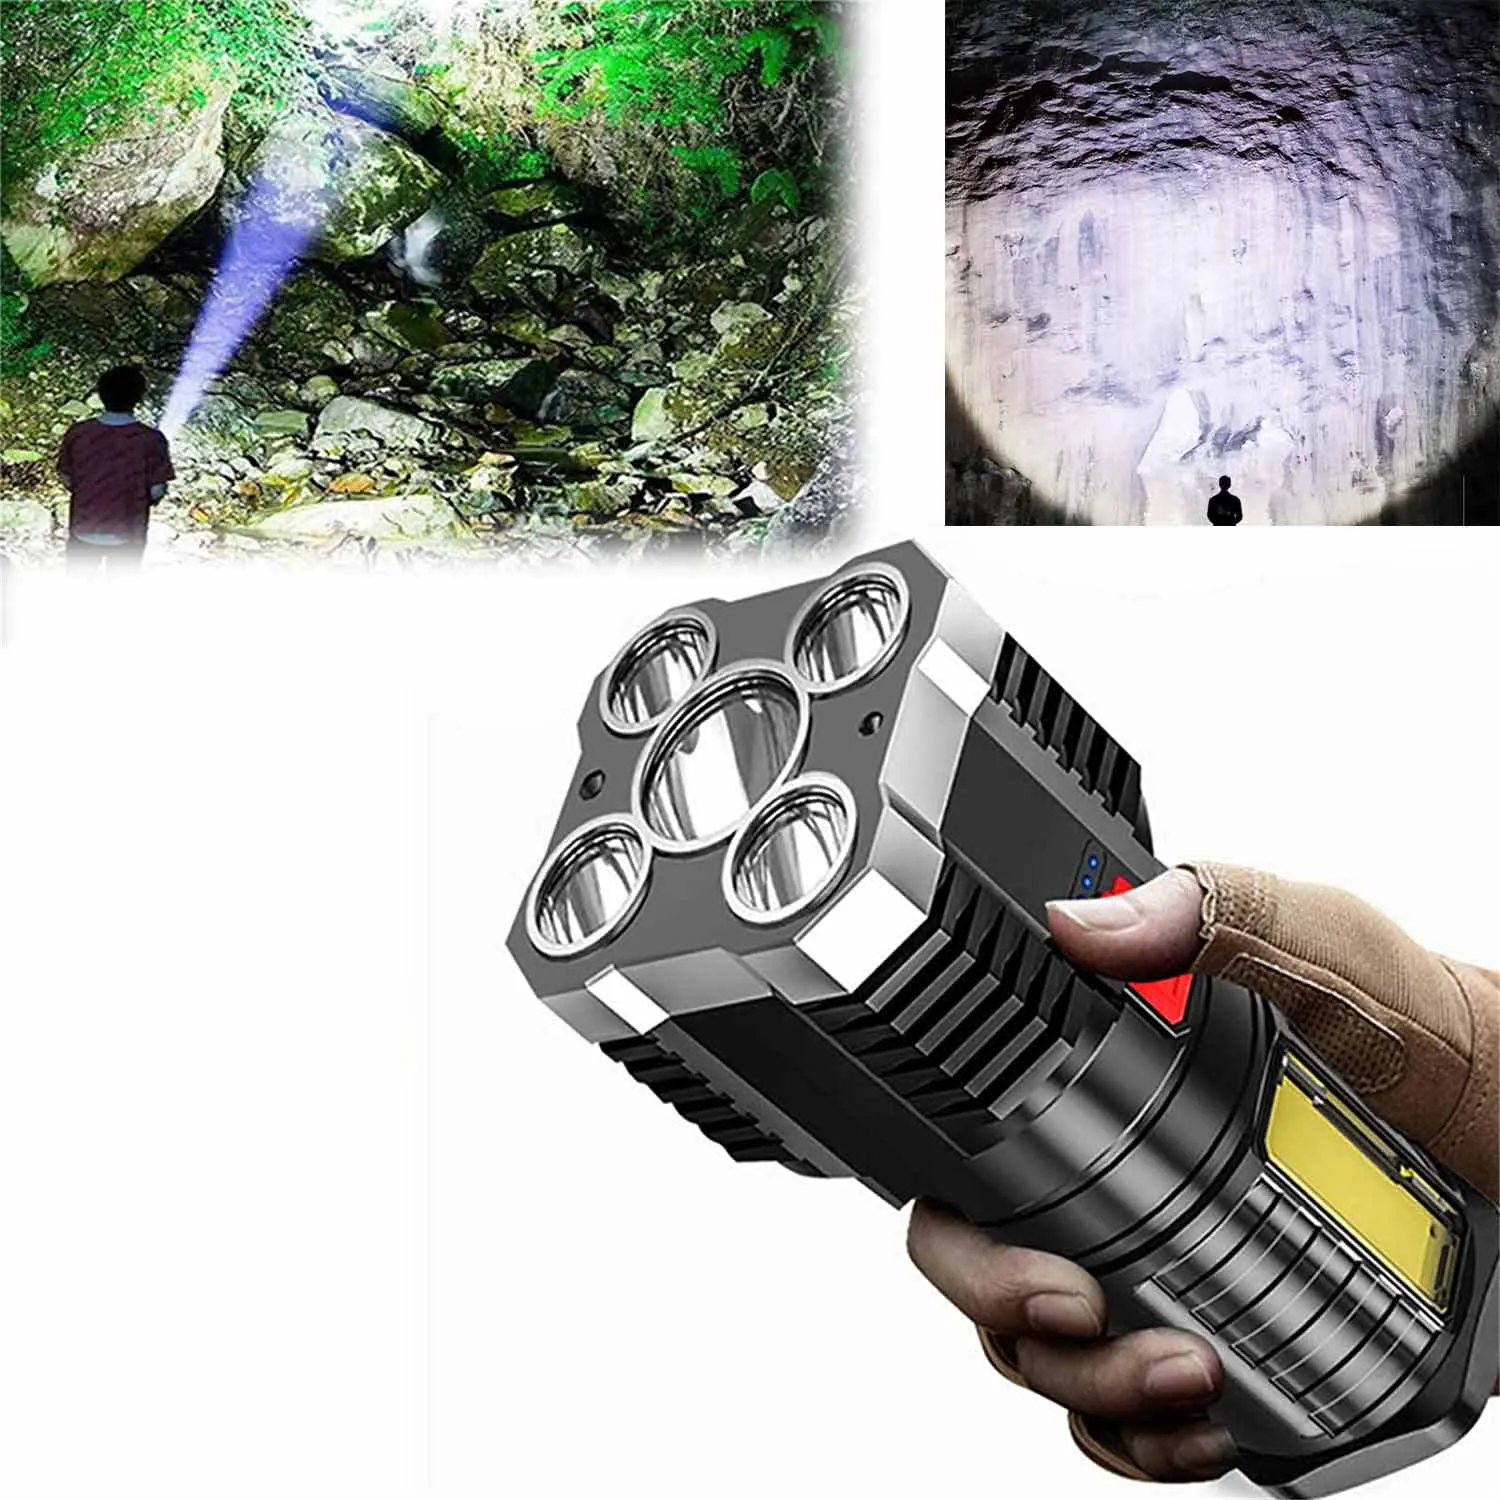 

New Five-nuclear Explosion Led Flashlight Strong Light Rechargeable Super Bright Outdoor Multi-Function USB Handheld Searchlight